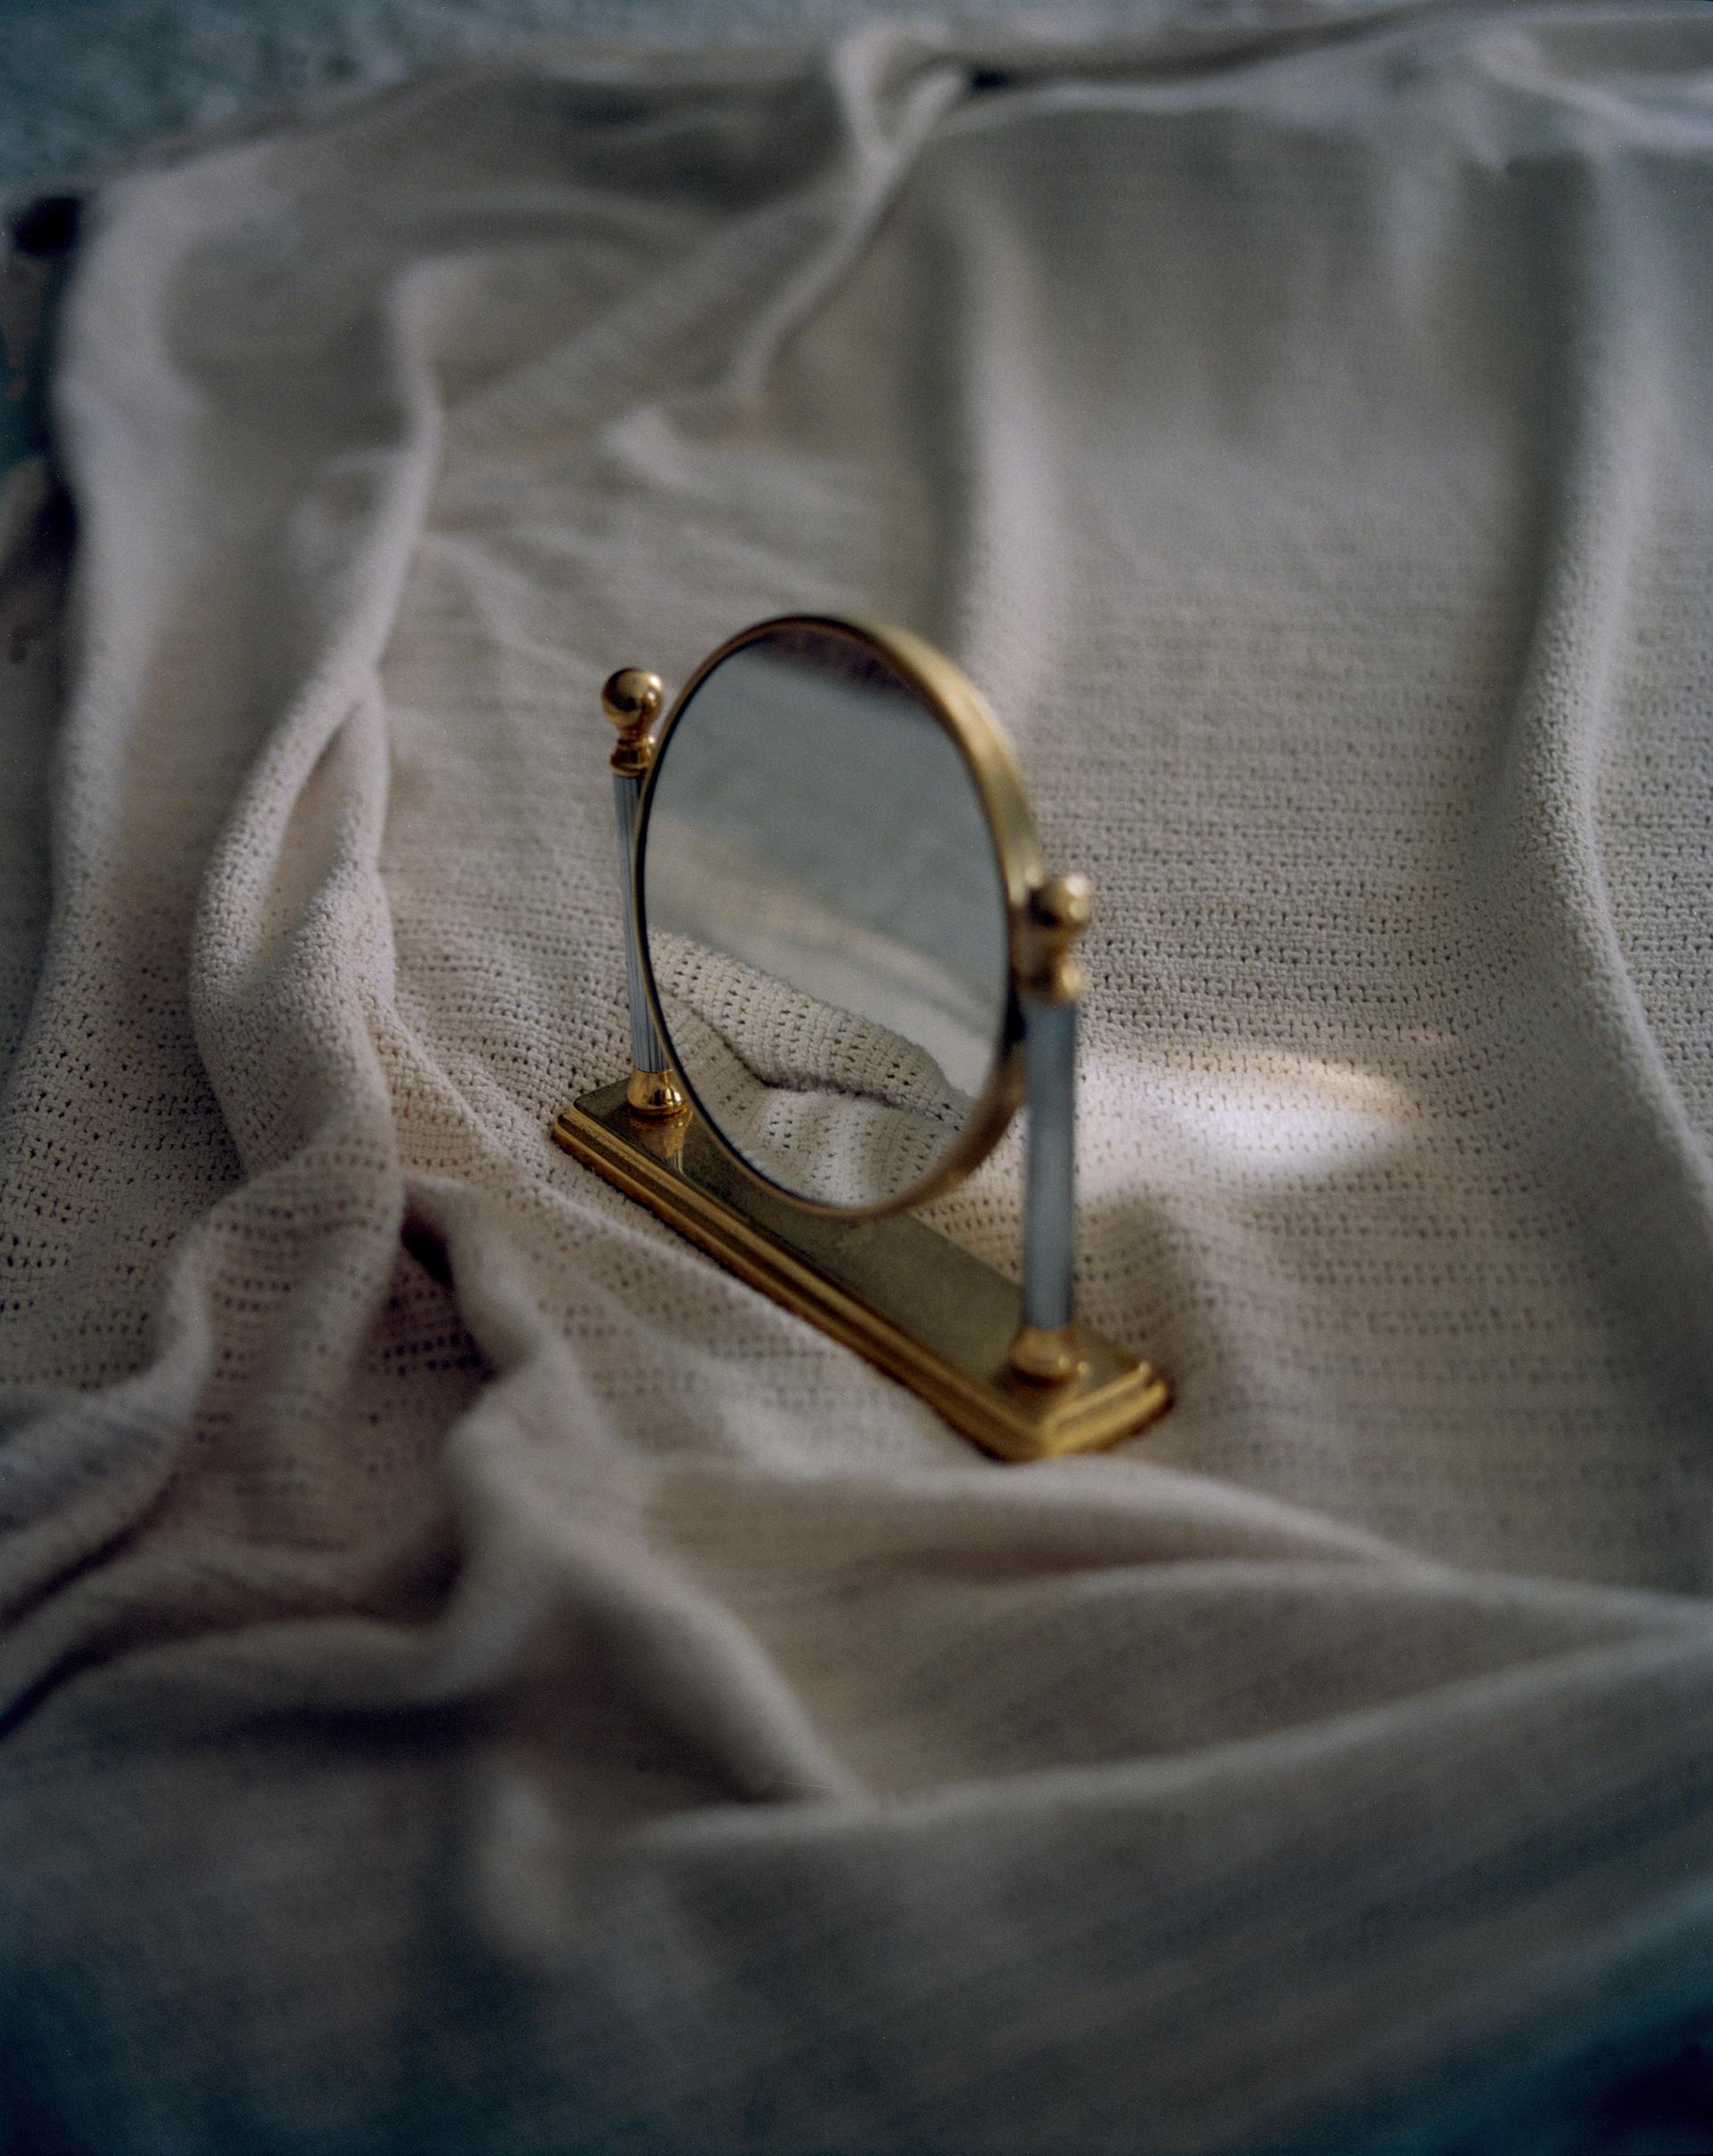 A small mirror stands on a bed, reflecting the rumpled sheets